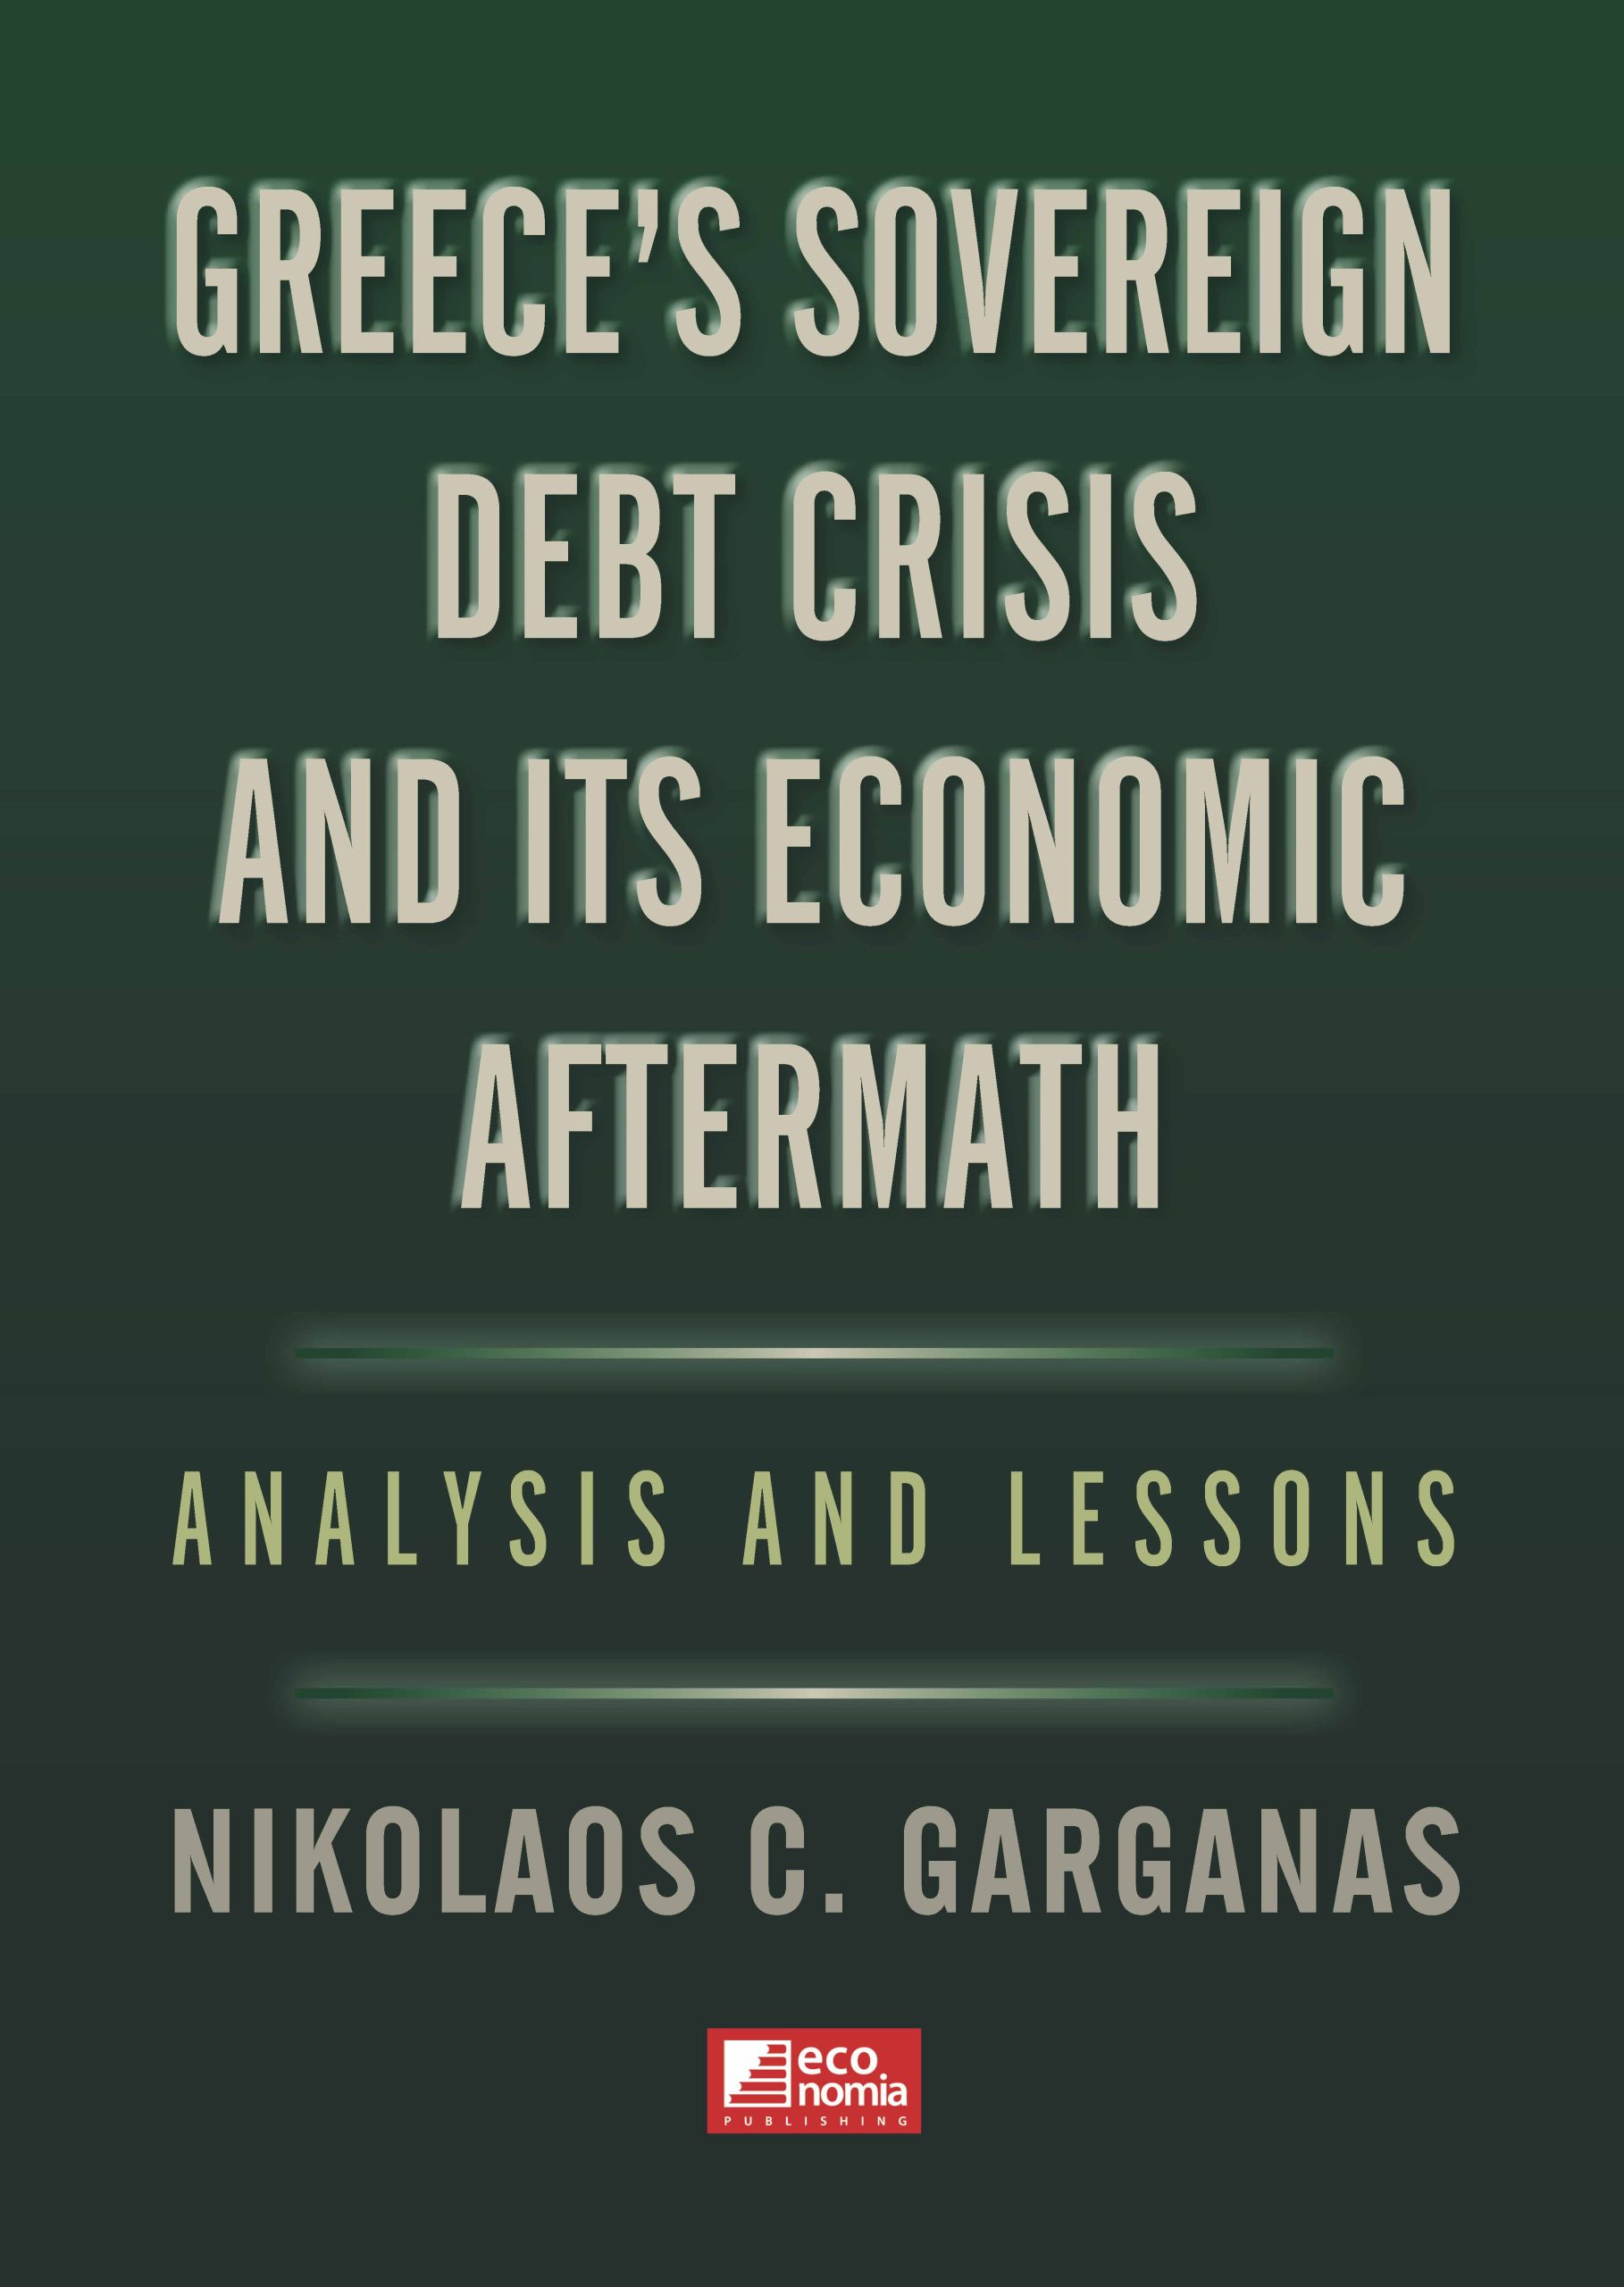 Greeces sovereign debt crisis and its economic aftermath